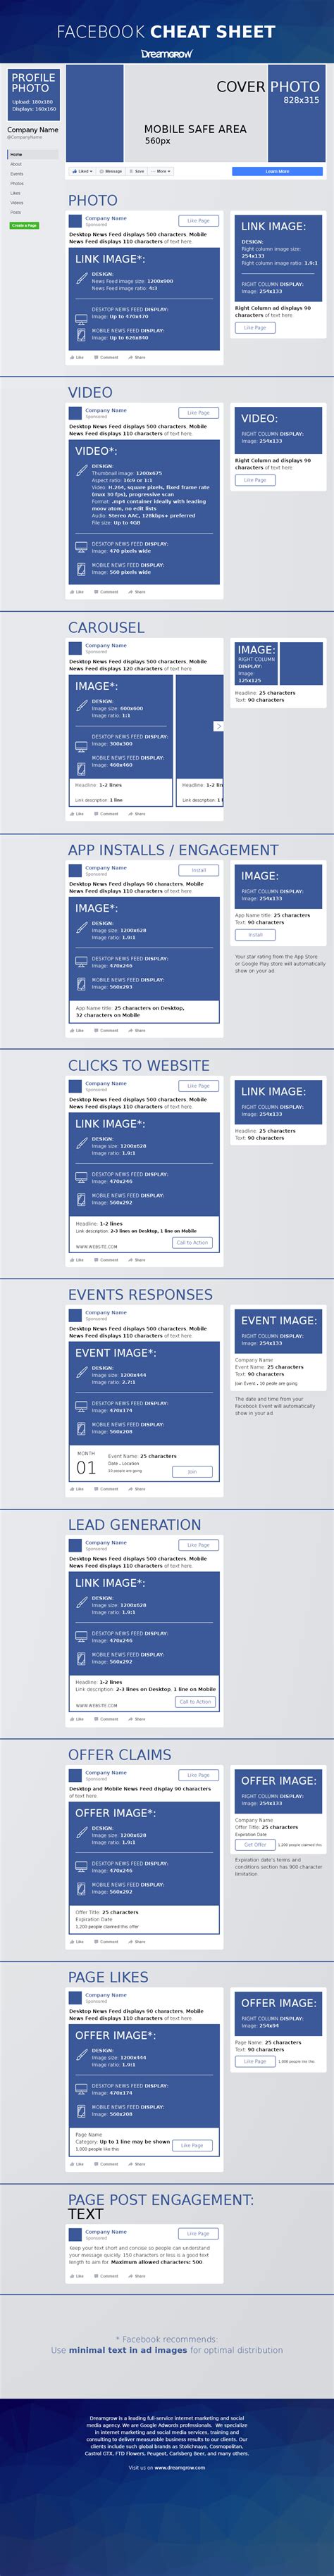 Facebook Cheat Sheet All Image Sizes Dimensions And Templates